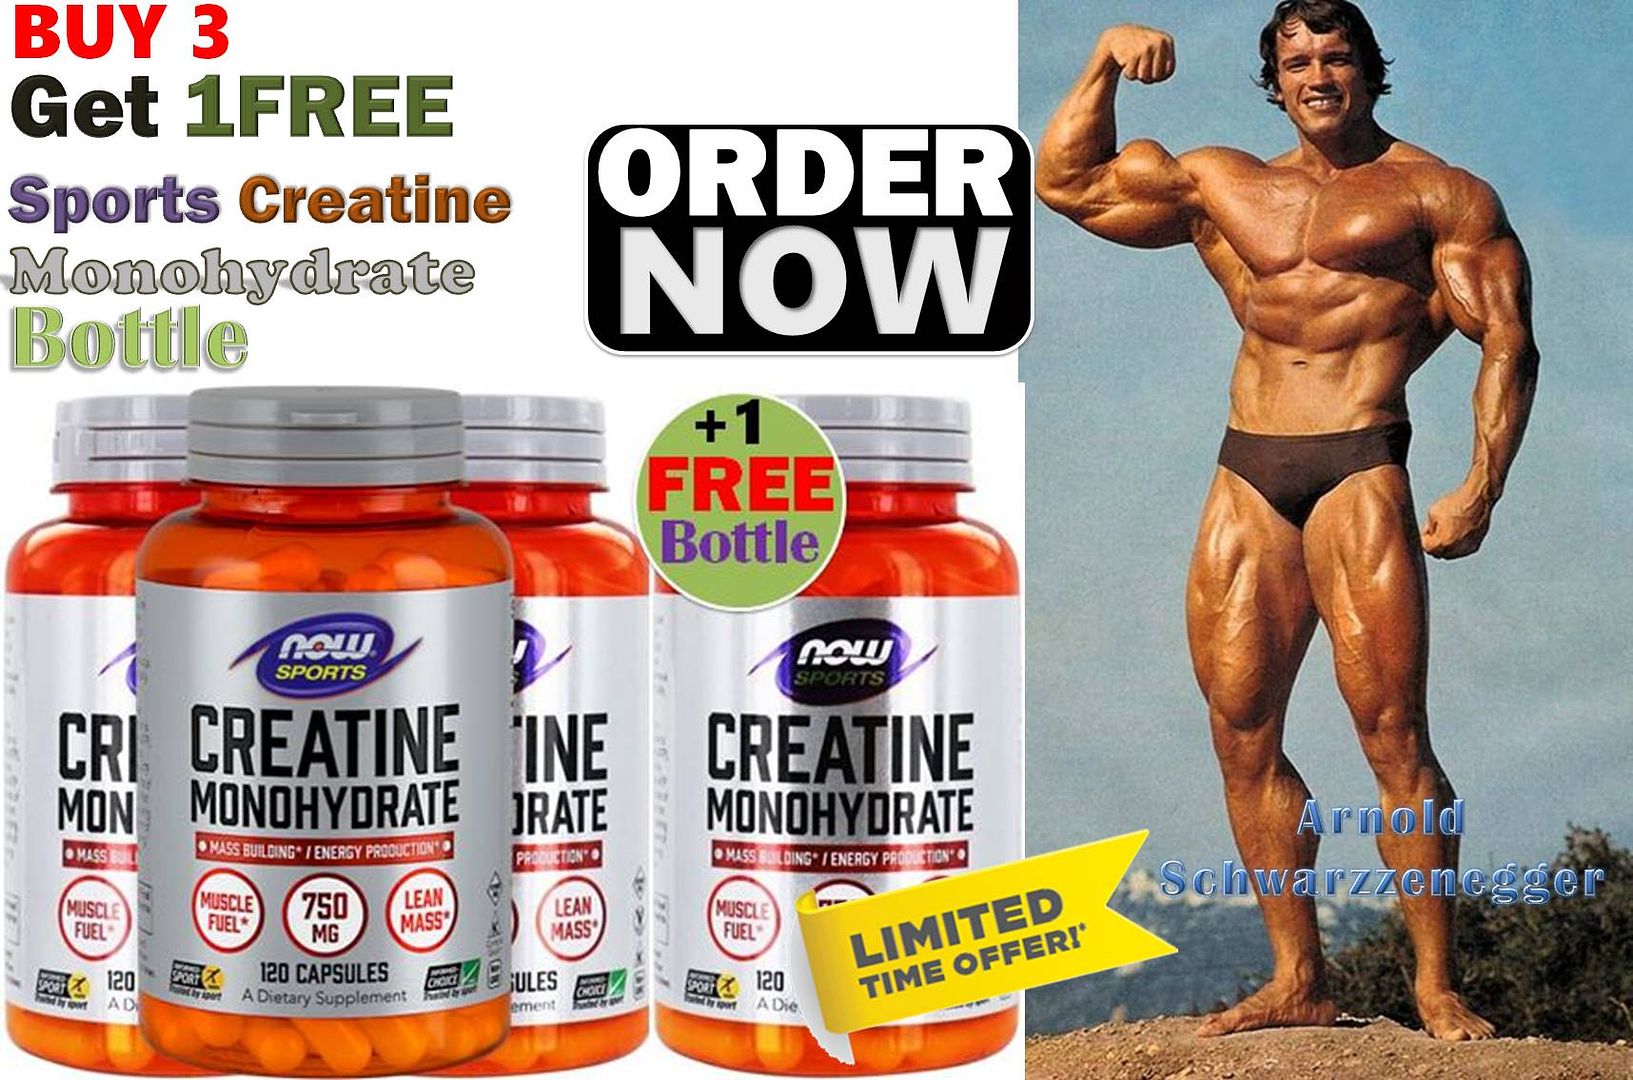 Sports Creatine Monohydrate by Now Sports